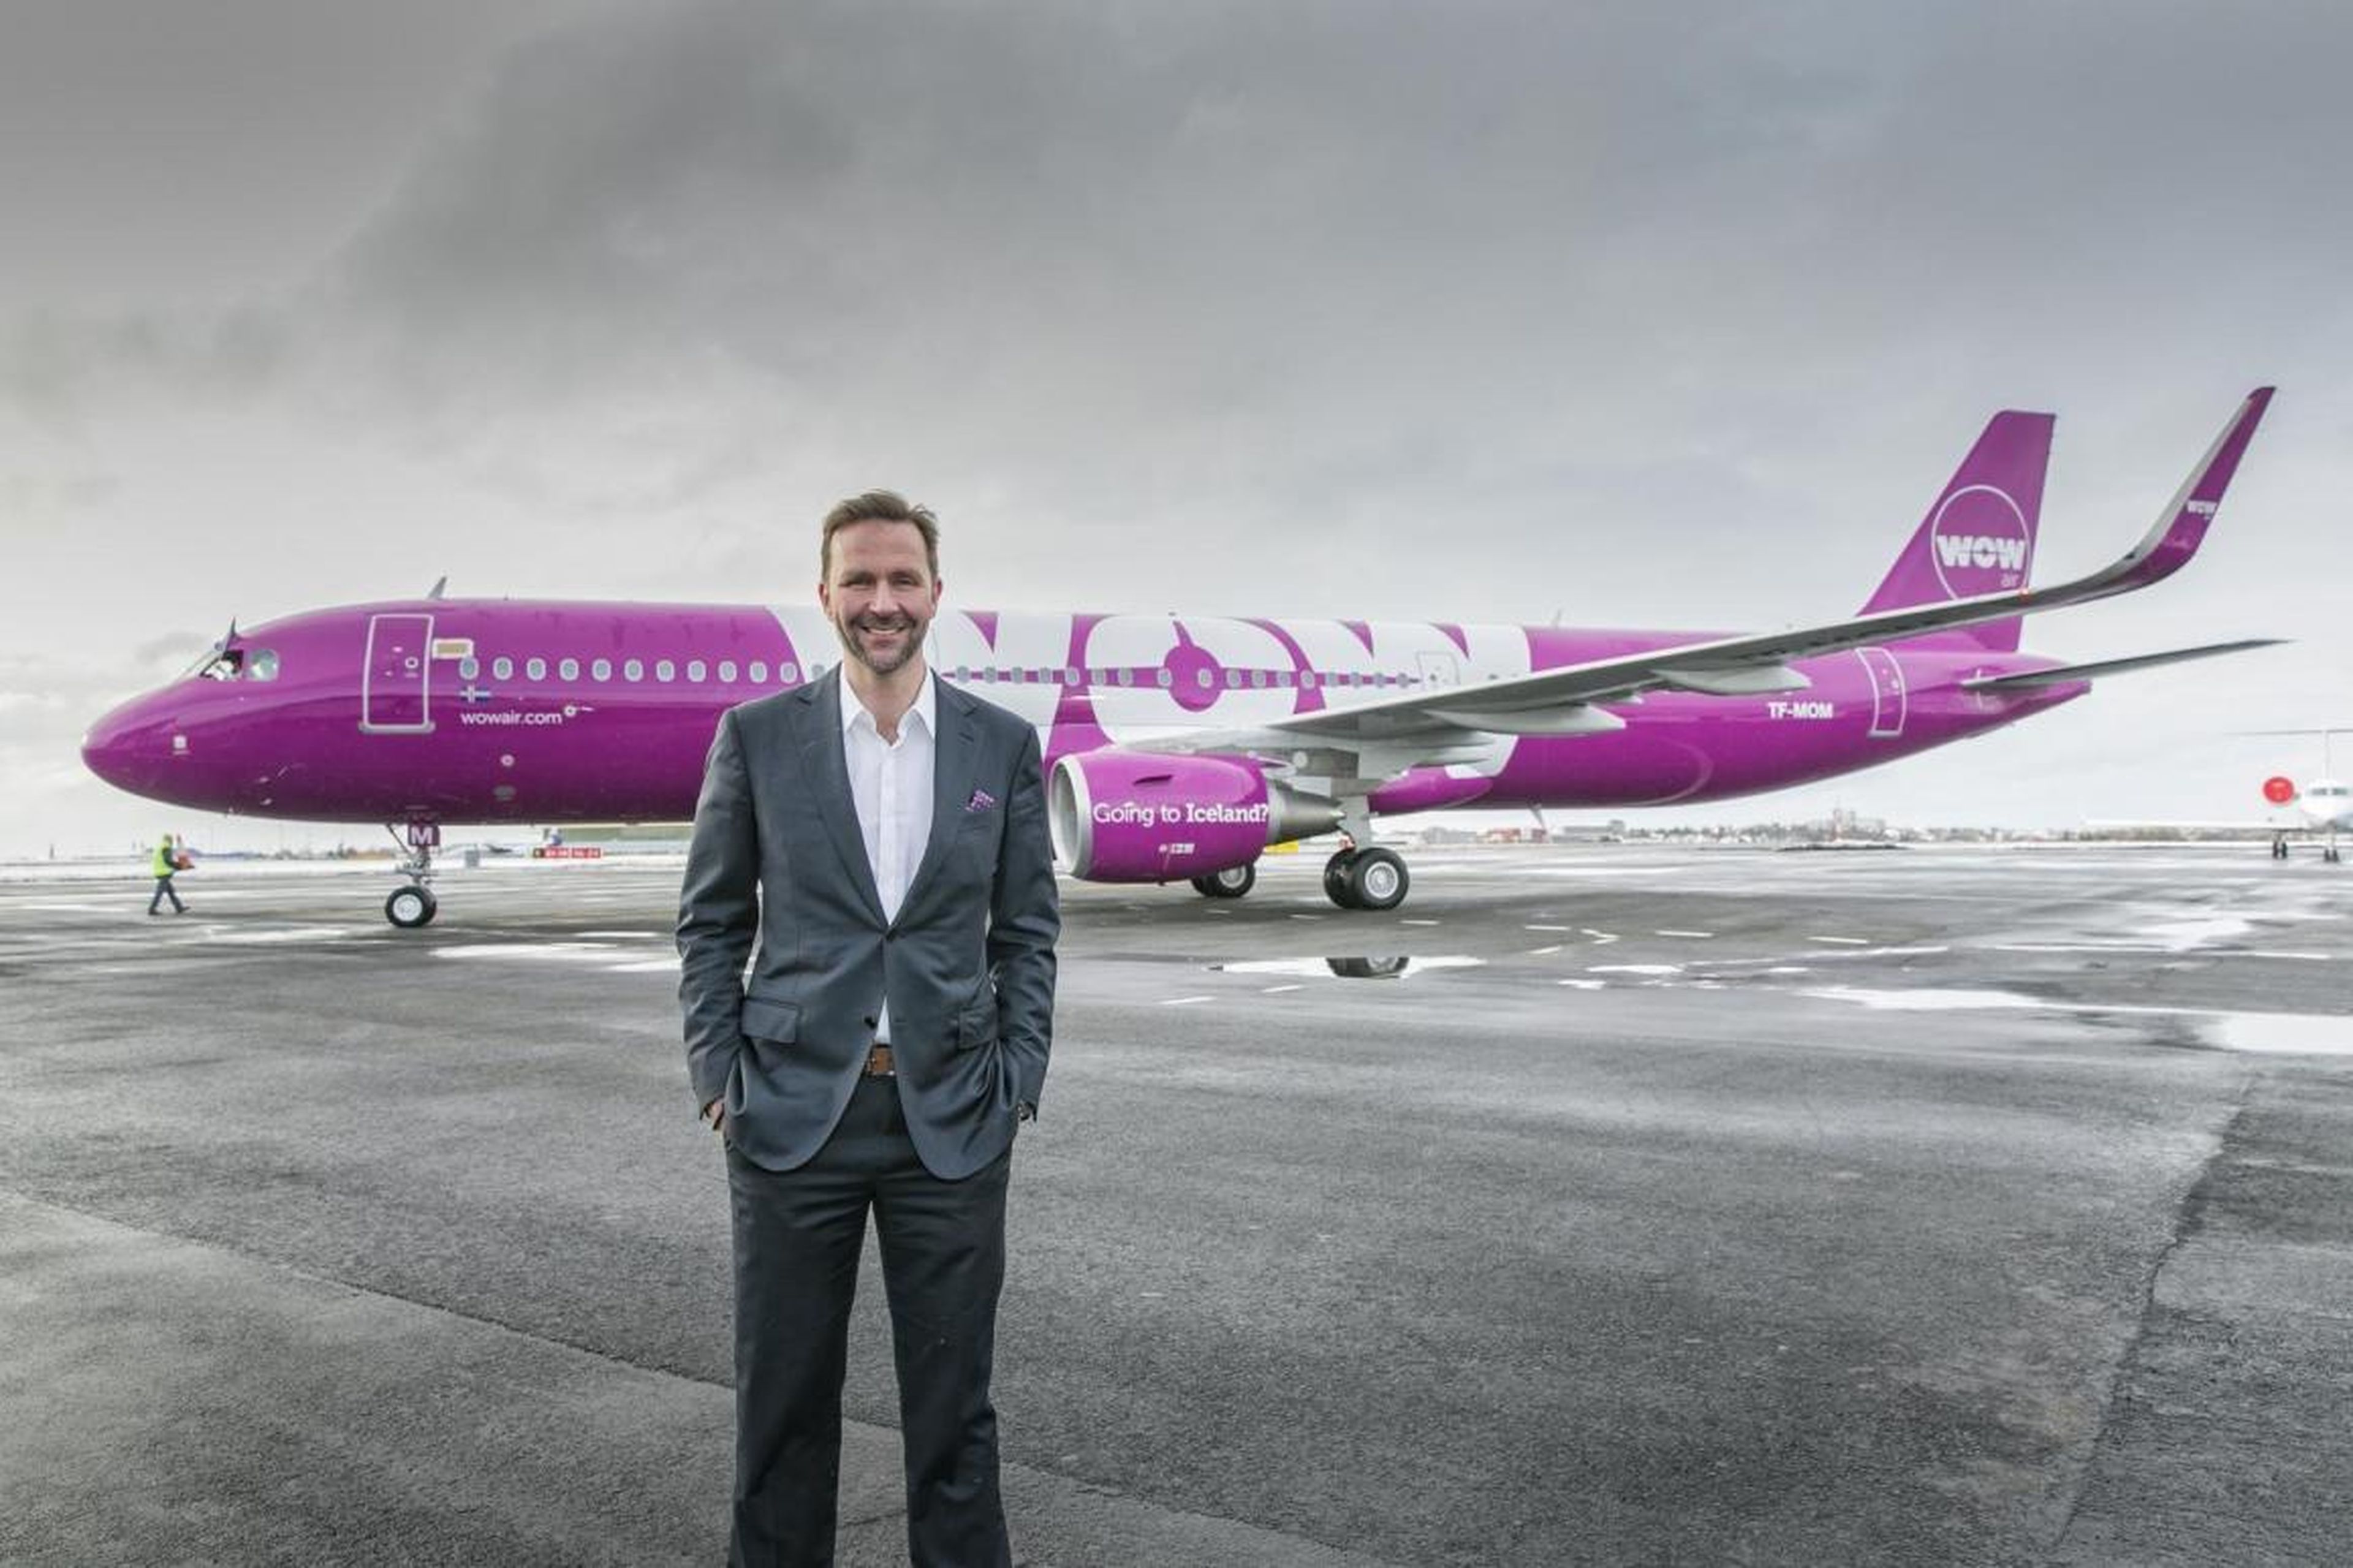 Wow Air has shut down. Here's what went wrong, according to the company's CEO.